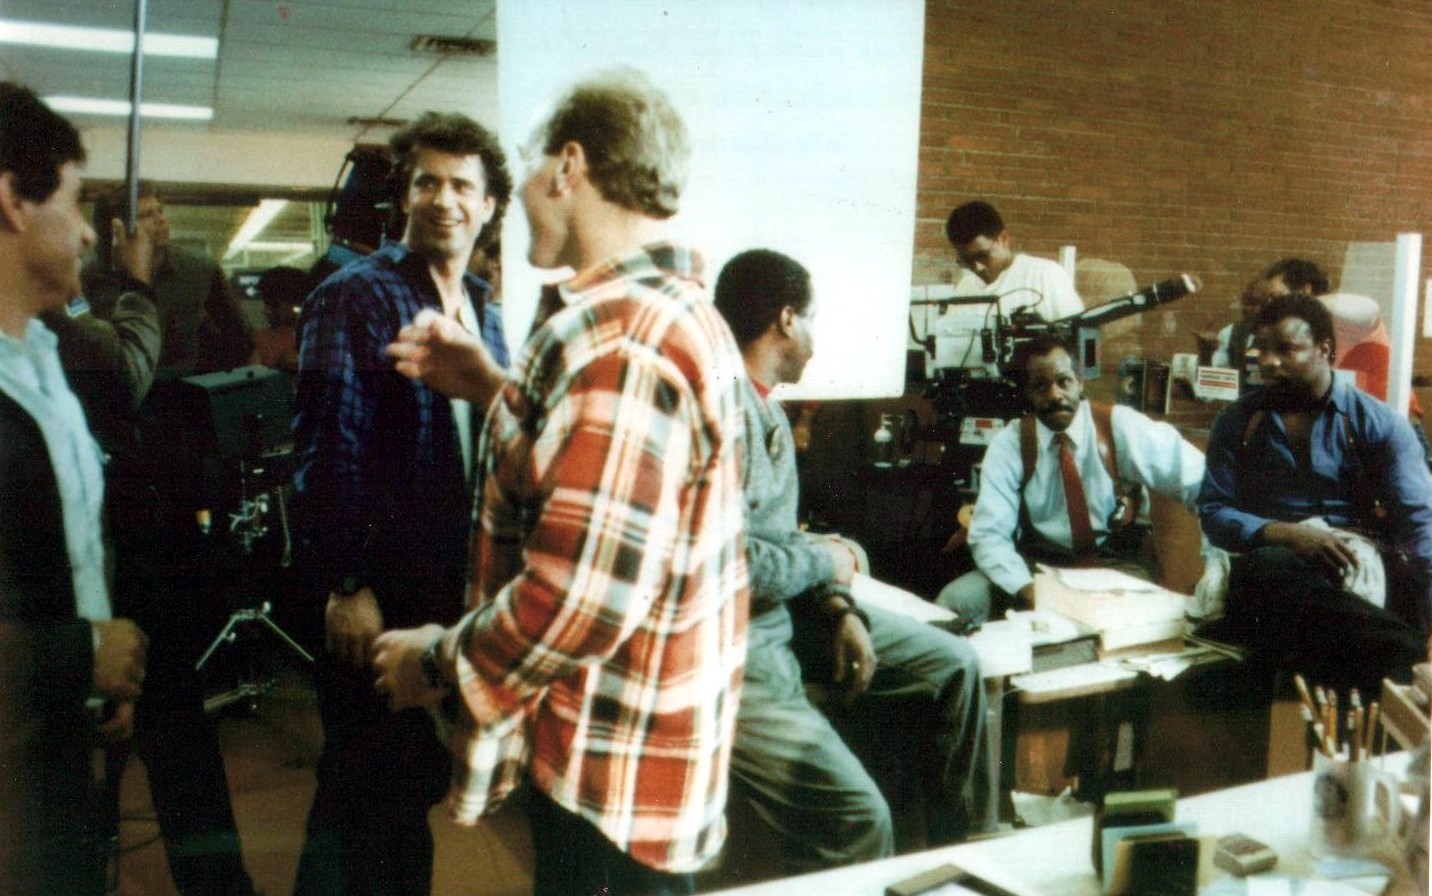 Mel Gibson, Danny Glover, Grand L. Bush and crew take a break during filming of LETHAL WEAPON II.